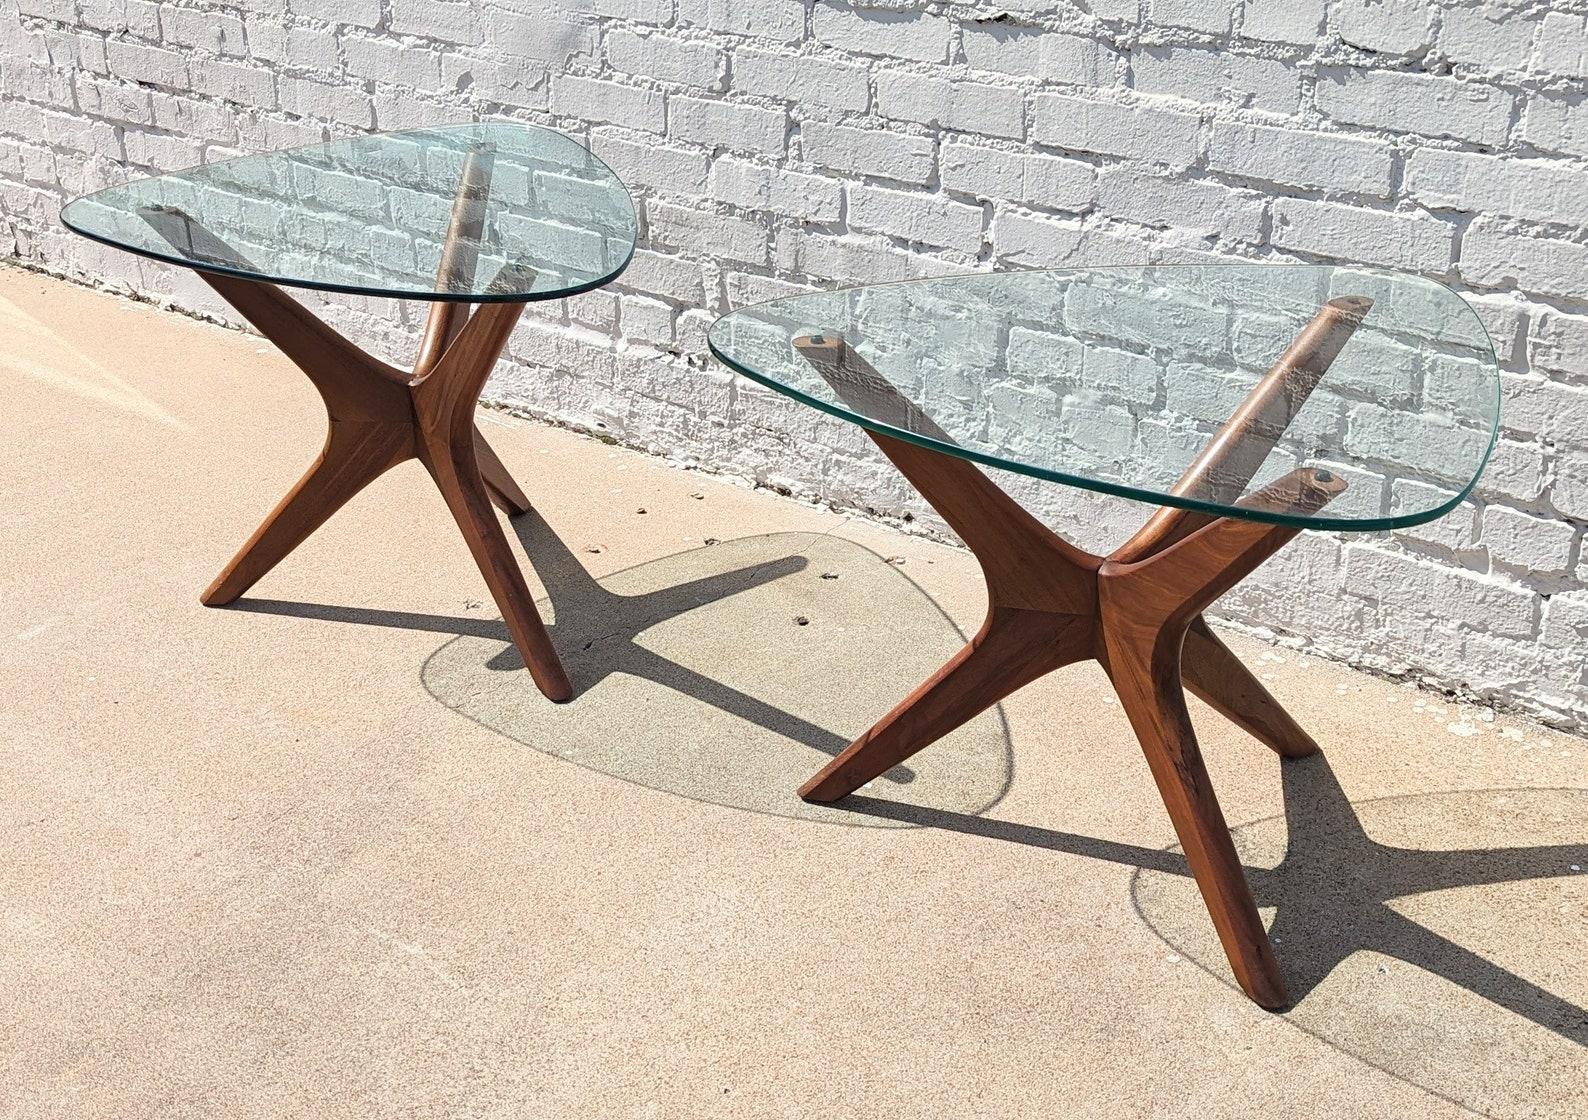 Mid Century Modern Adrian Pearsall Jacks Side Tables

Sold as pair. Above average vintage condition and structurally sound. Have some expected slight finish wear and scratching. Glass has no edge chips but does have some surface scratching. Outdoor